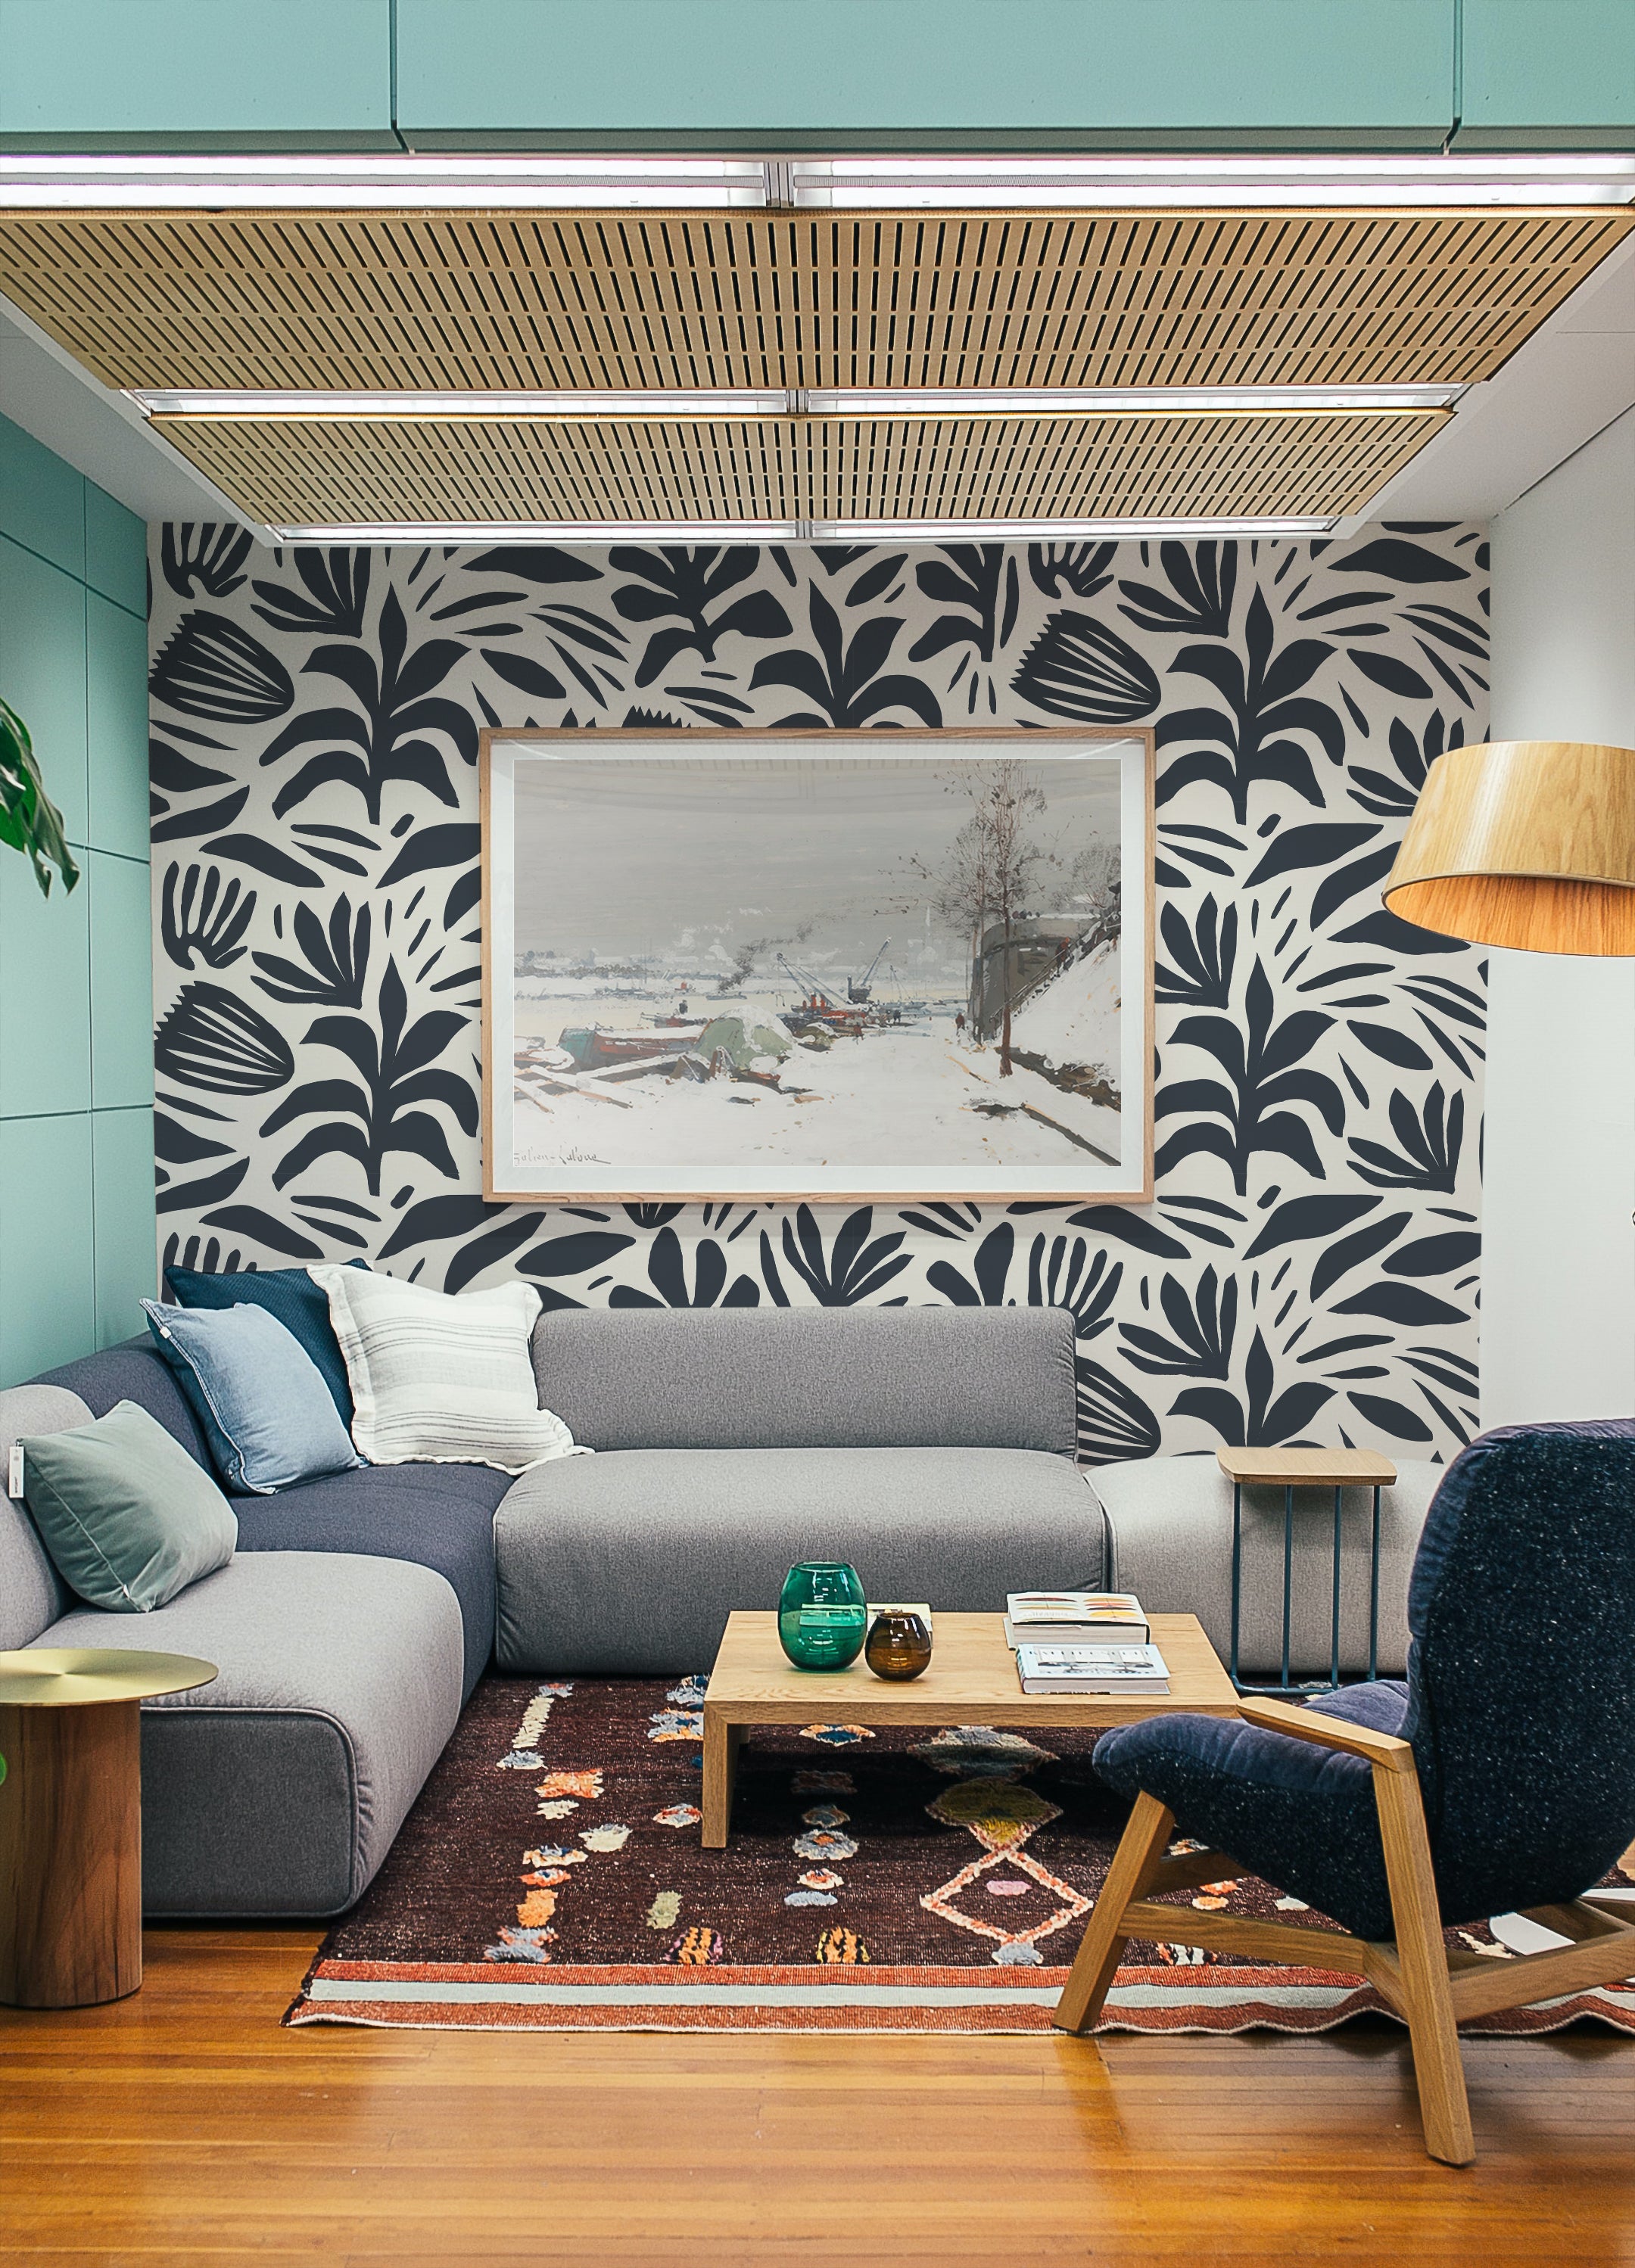 A modern living room with a grey sectional sofa, a colorful patterned rug, and a wooden coffee table. The wall behind the sofa is adorned with Dark Bloom Wallpaper, showcasing bold black abstract floral and leaf patterns on a white background, complemented by a framed landscape artwork.